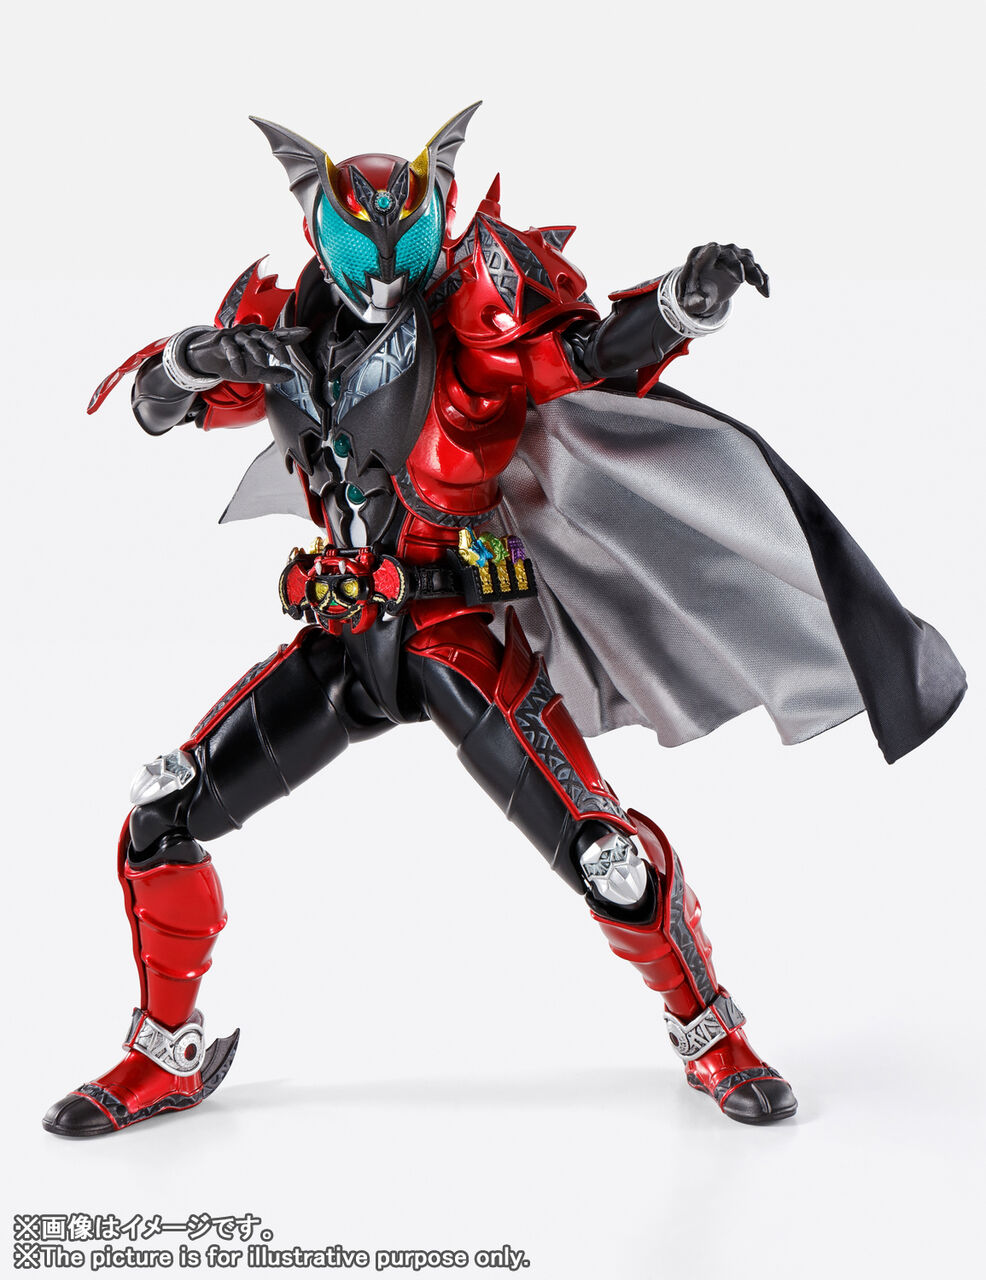 S H Figuarts 真骨彫製法 仮面ライダーダークキバ の商品化が決定 Hobby Watch